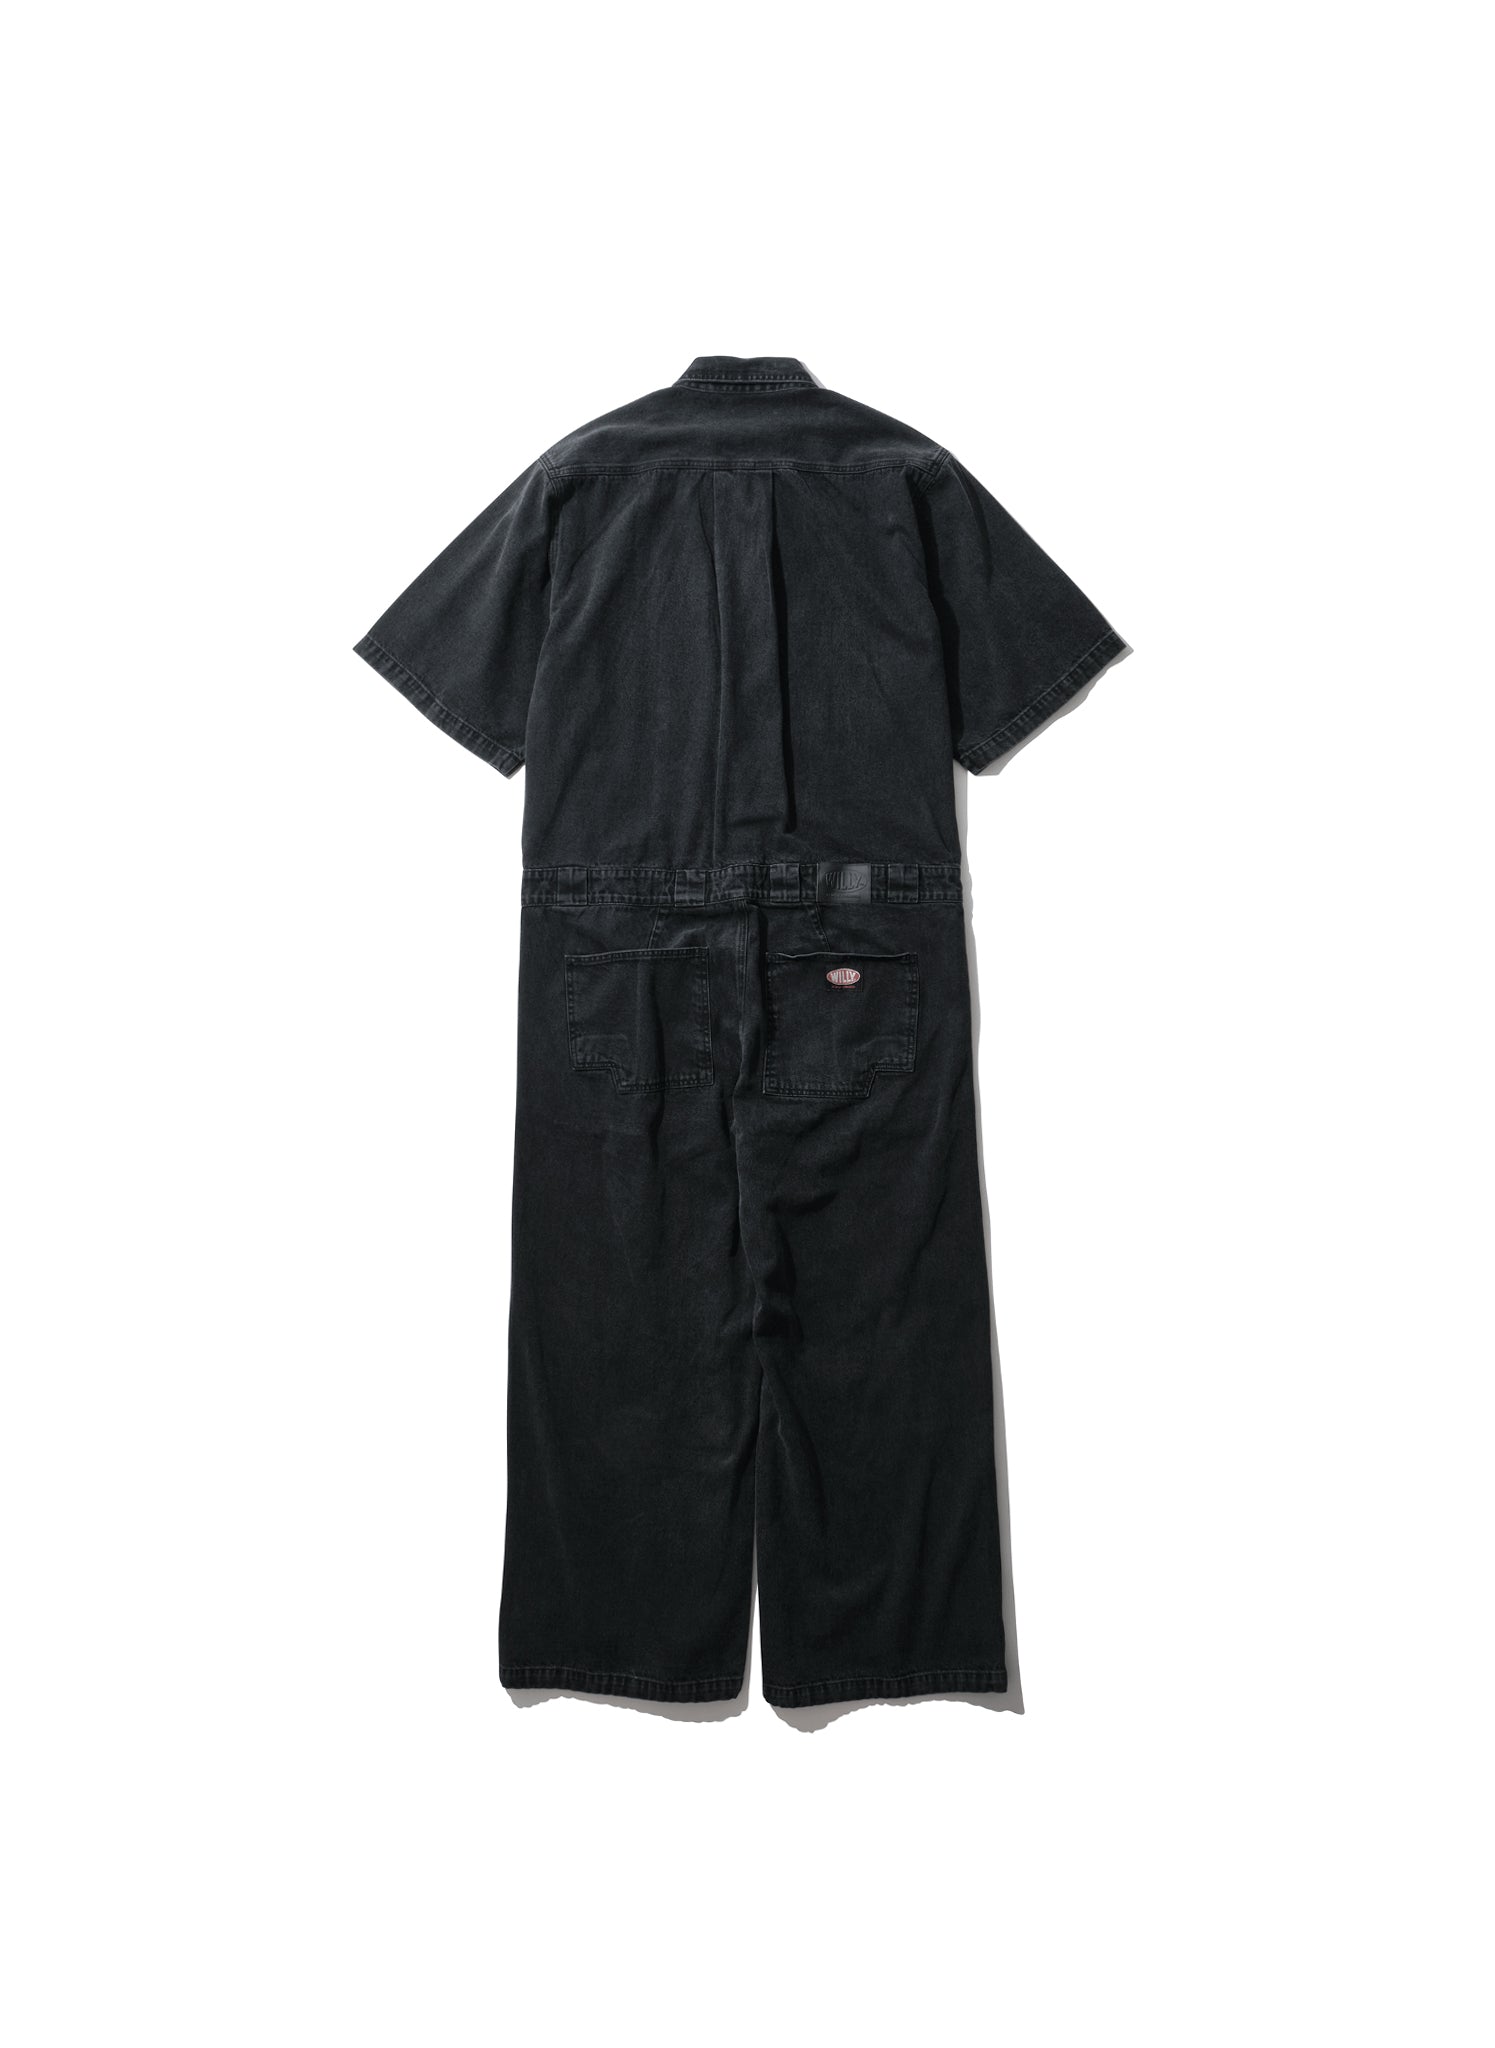 WILLY CHAVARRIA / WILLY JUMP SUIT WASHED BLACK